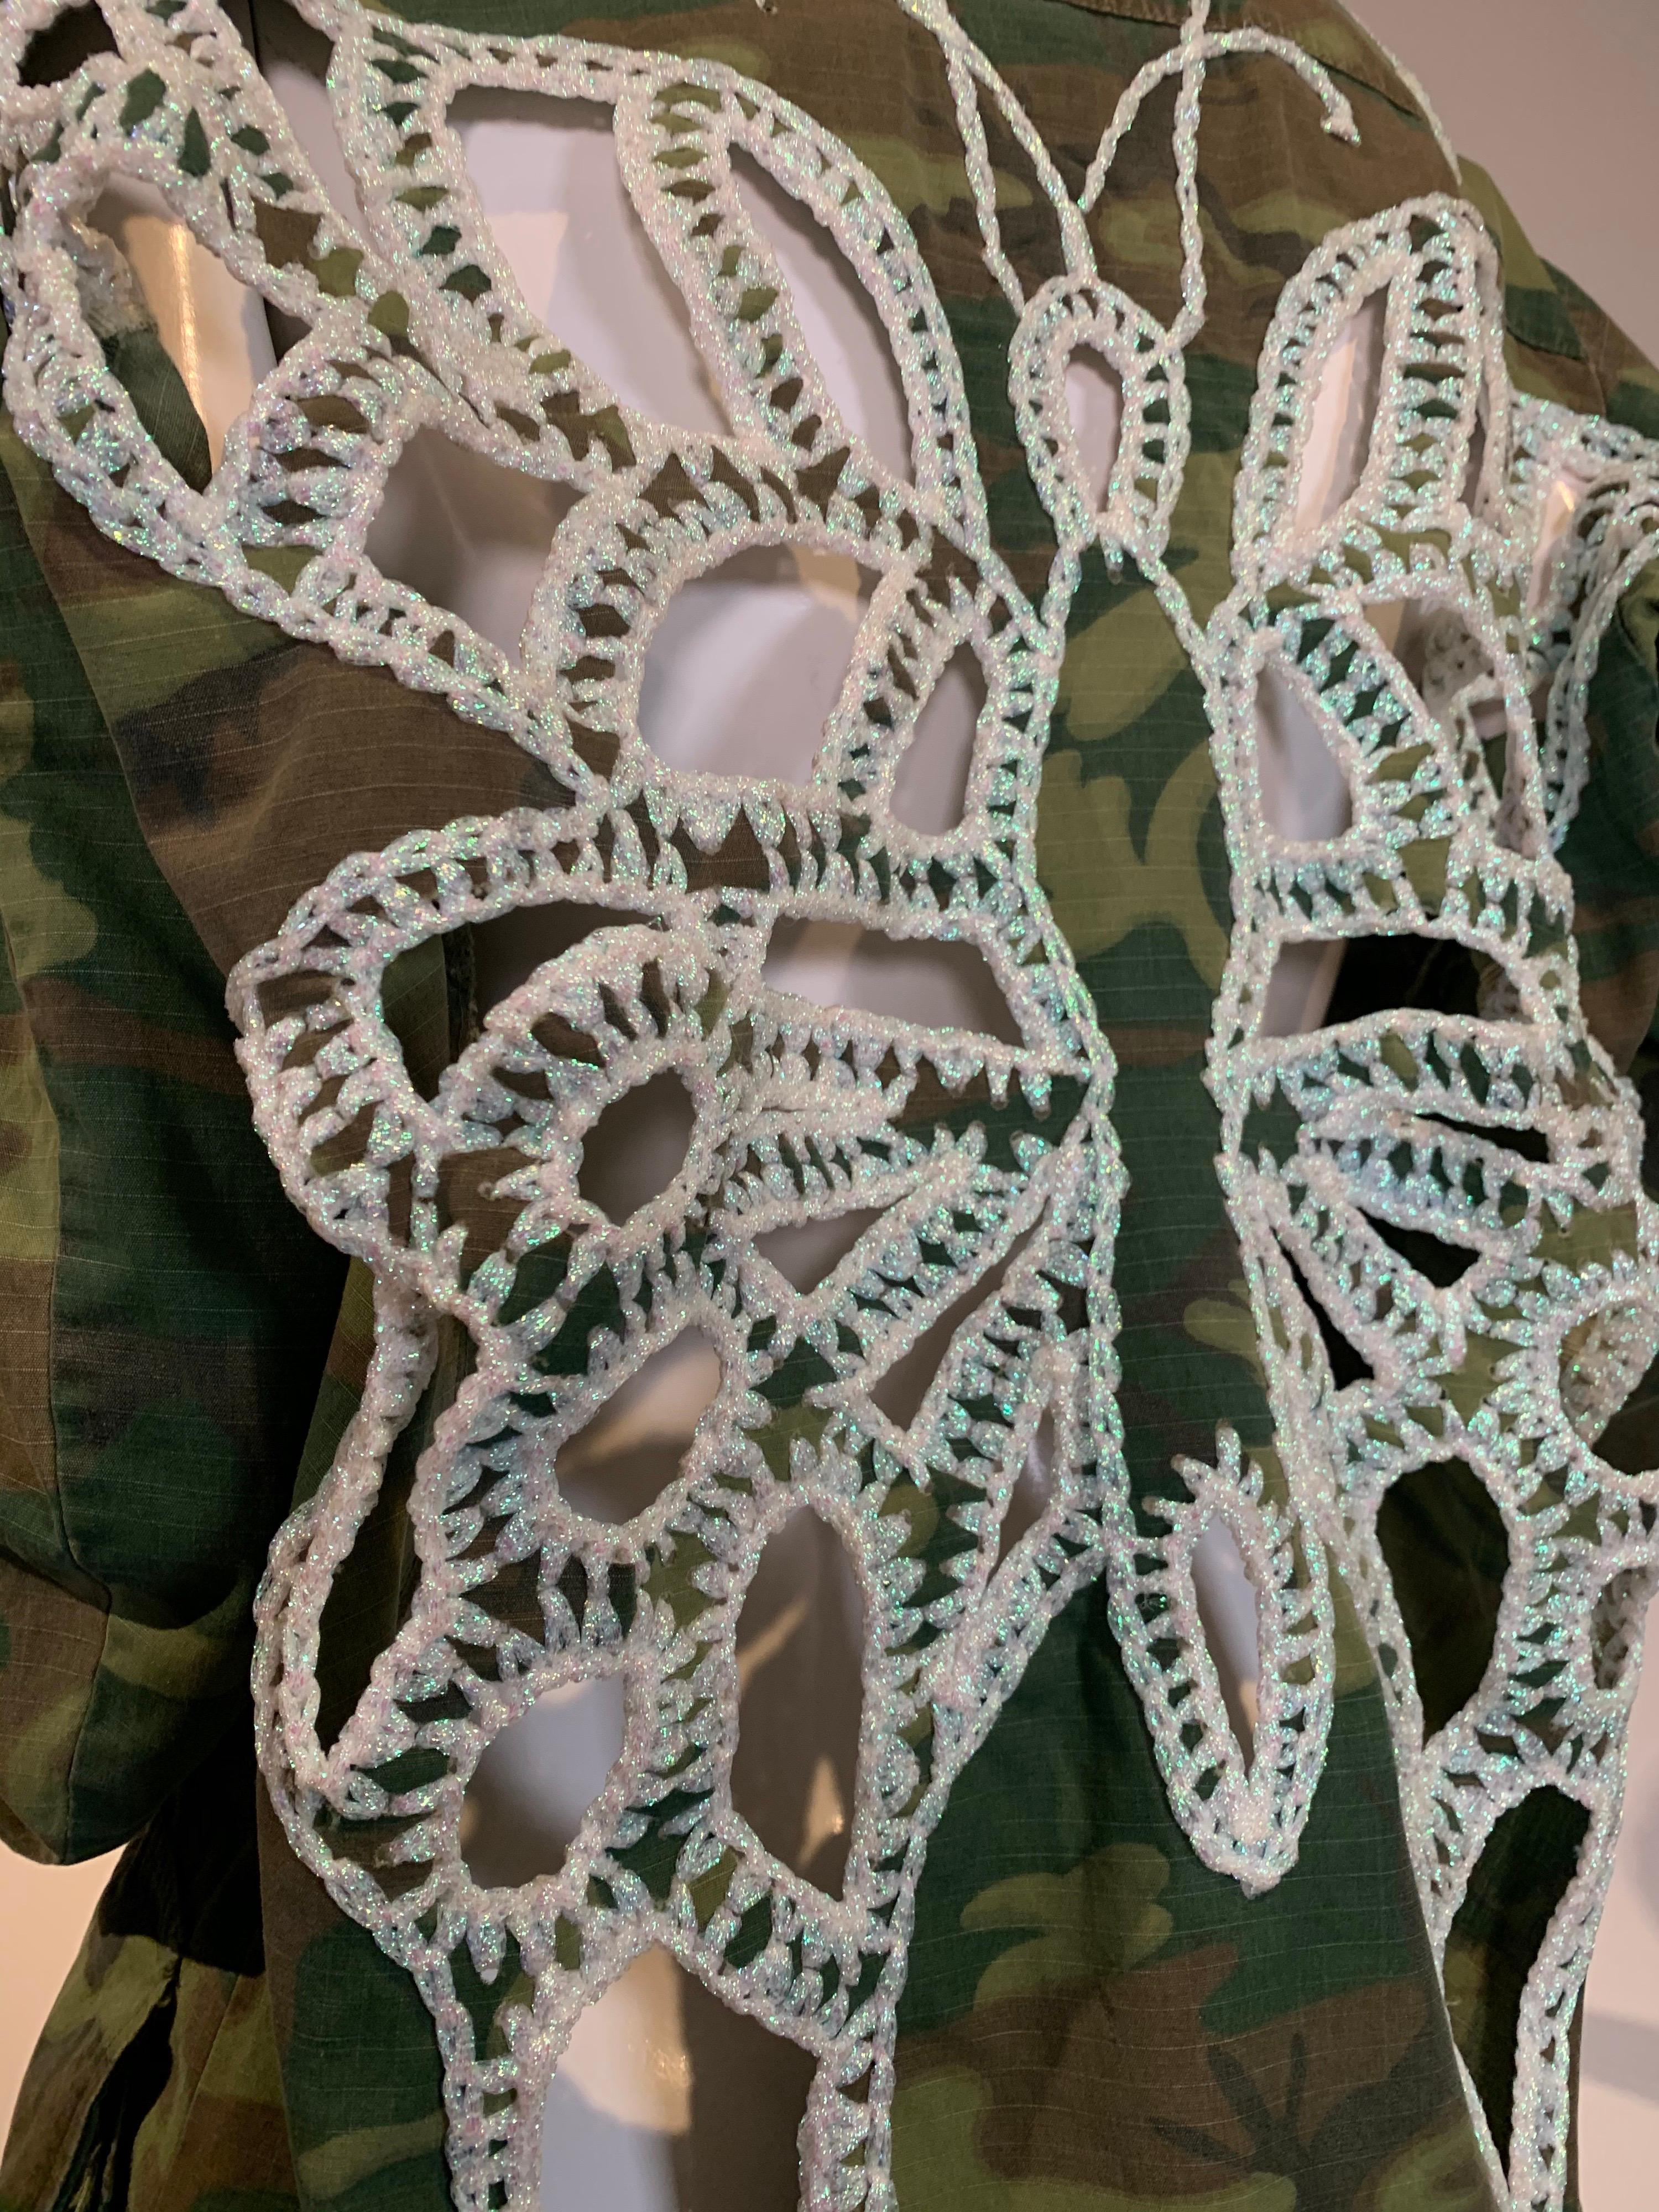 Torso Creations updates a vintage military cotton camouflage jacket with crochet and peek-a-boo butterfly design on back.  Imported, iridescent yarns edge and connect the cutout sections of this one-of-a-kind piece. Size Small-Medium 